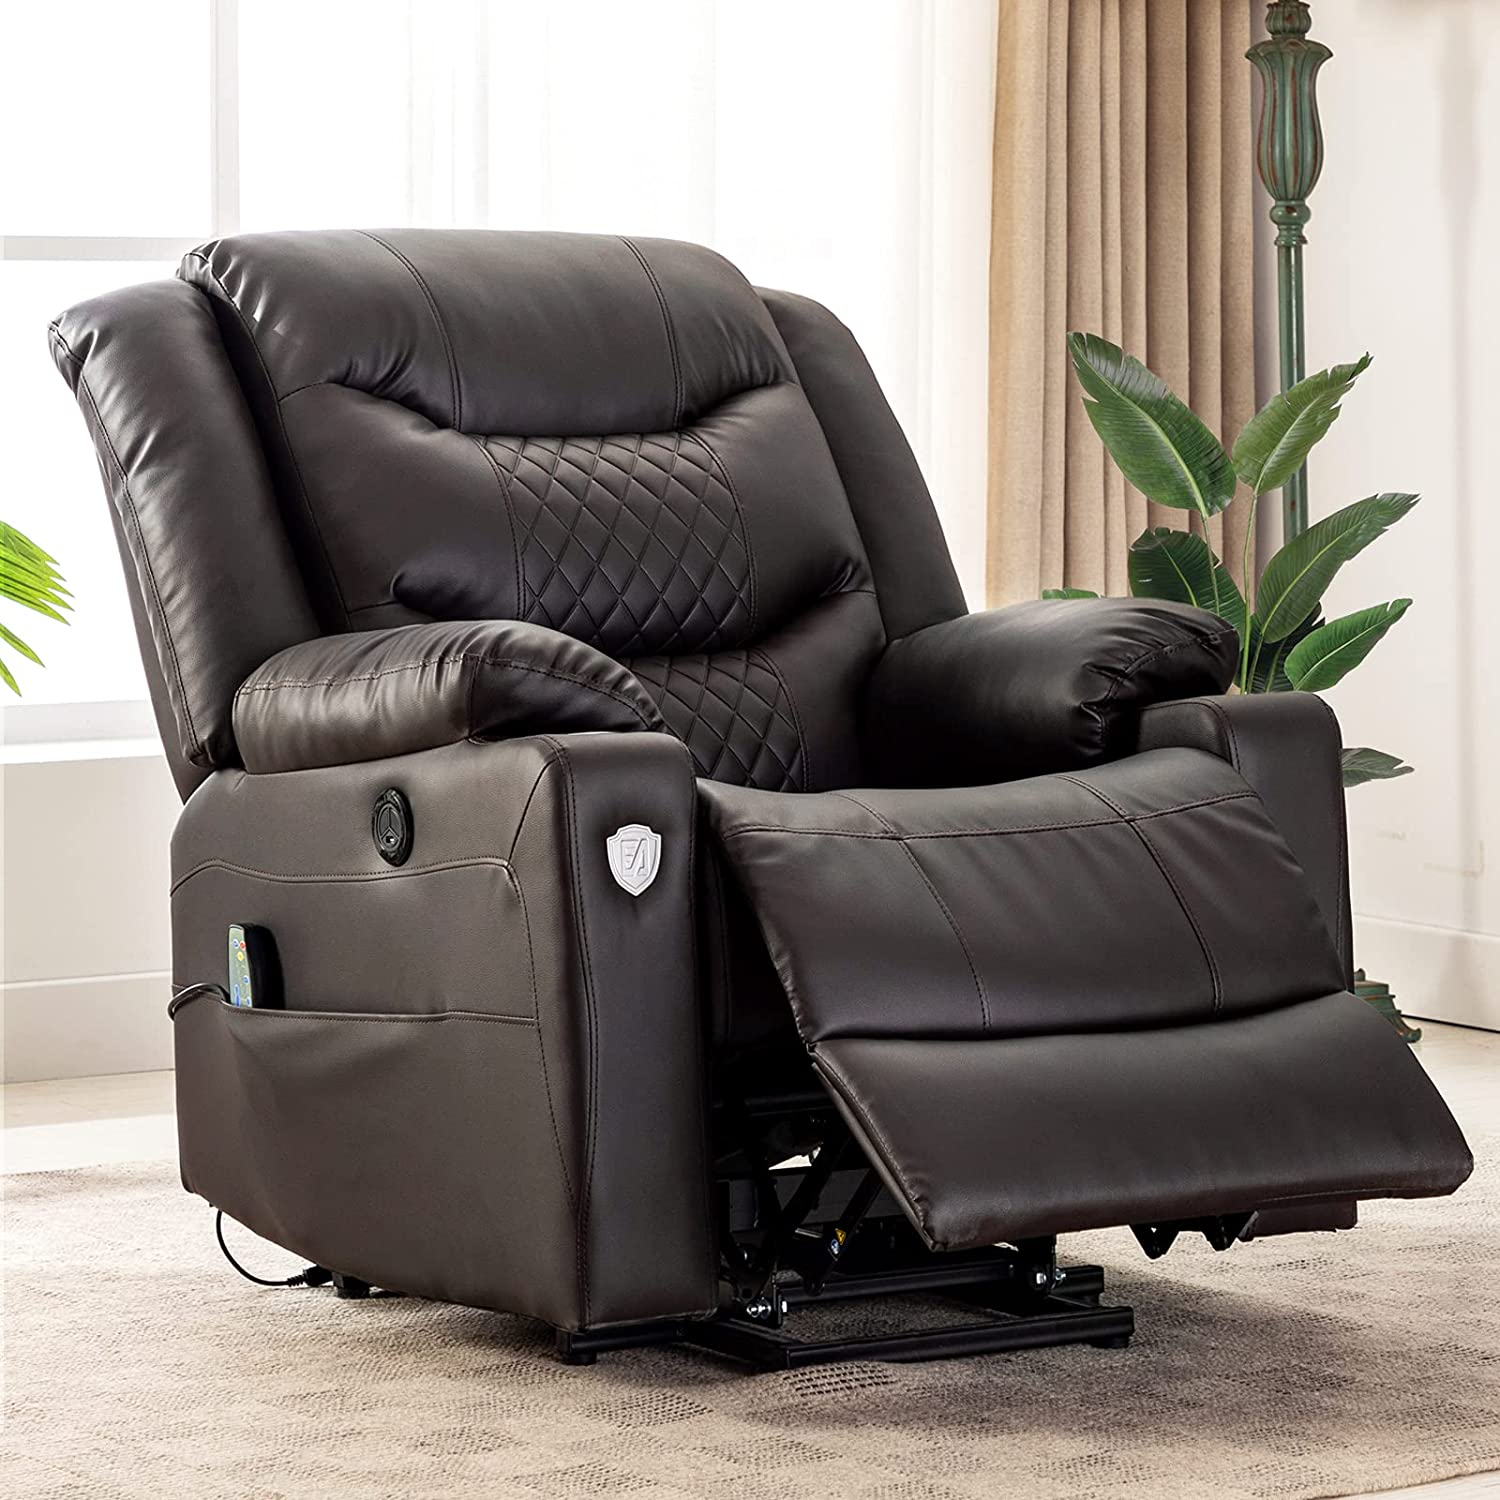 What Is A Lift Chair Recliner | Storables